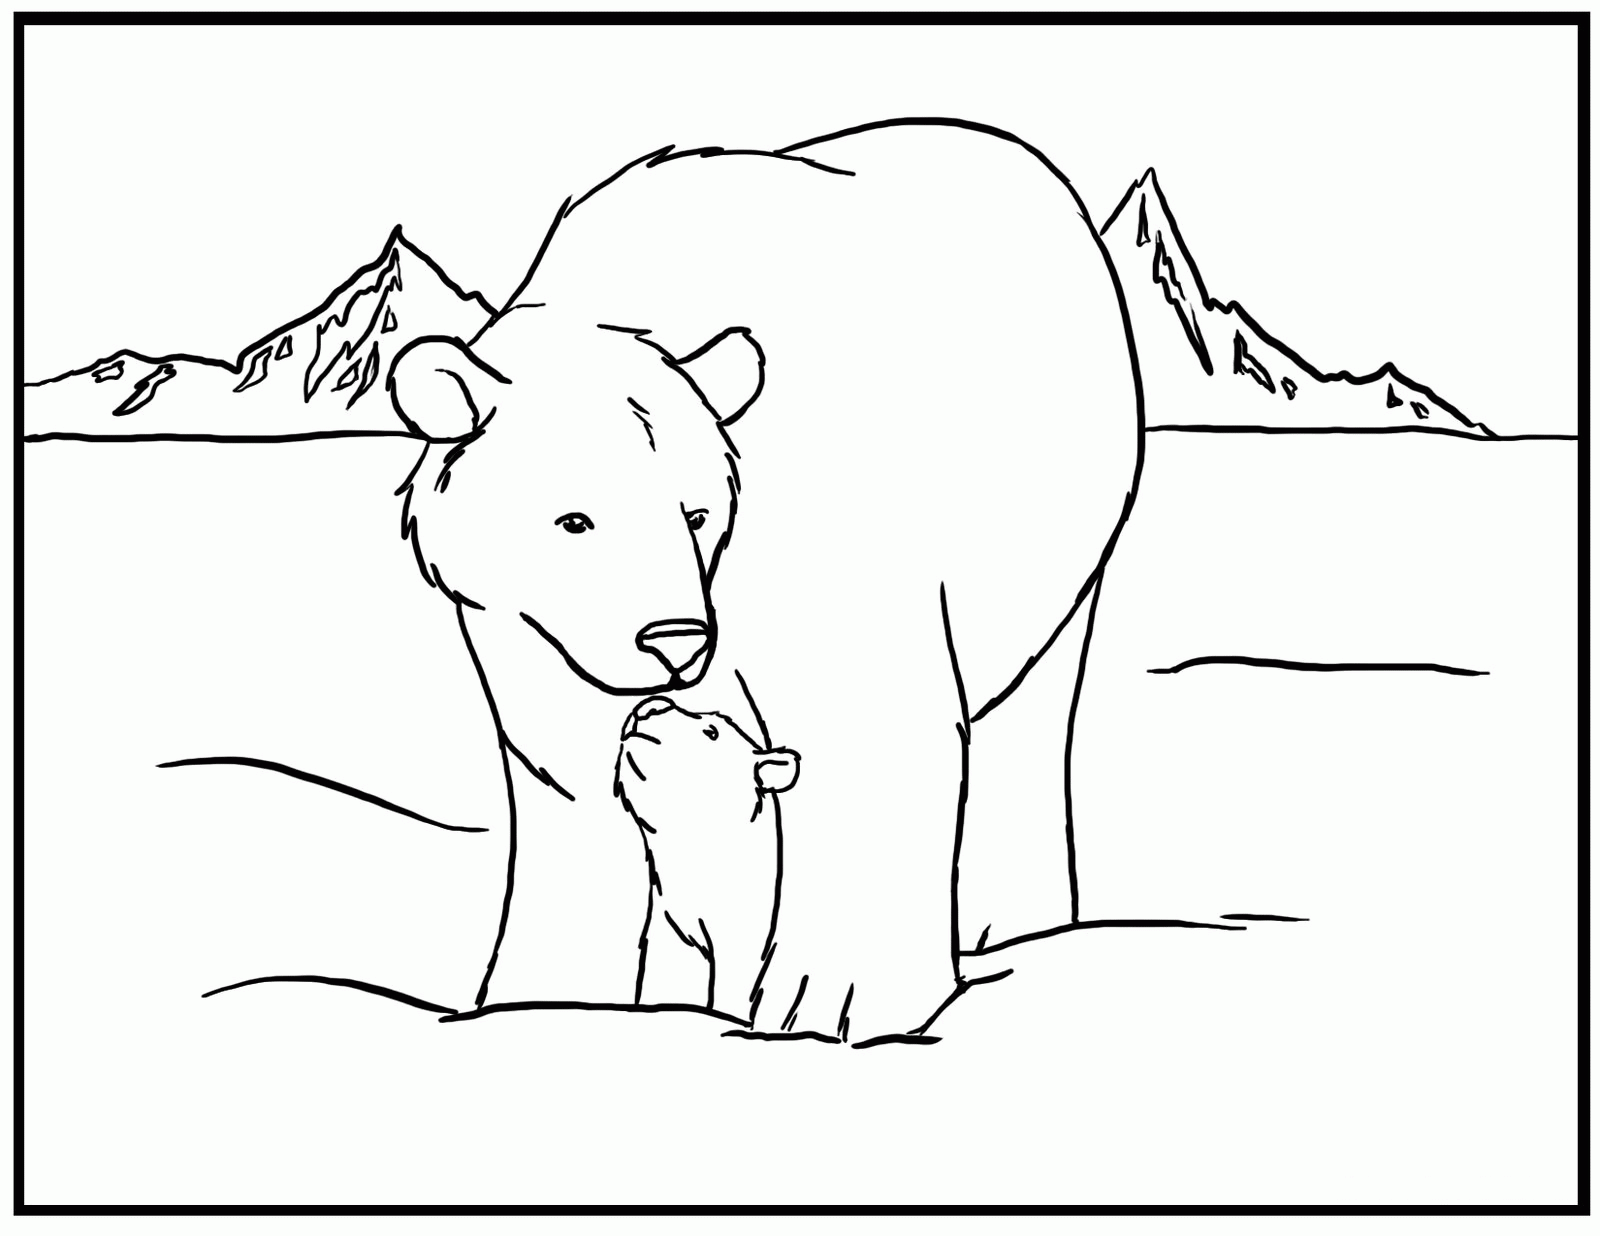 animals in the tundra drawings - Clip Art Library